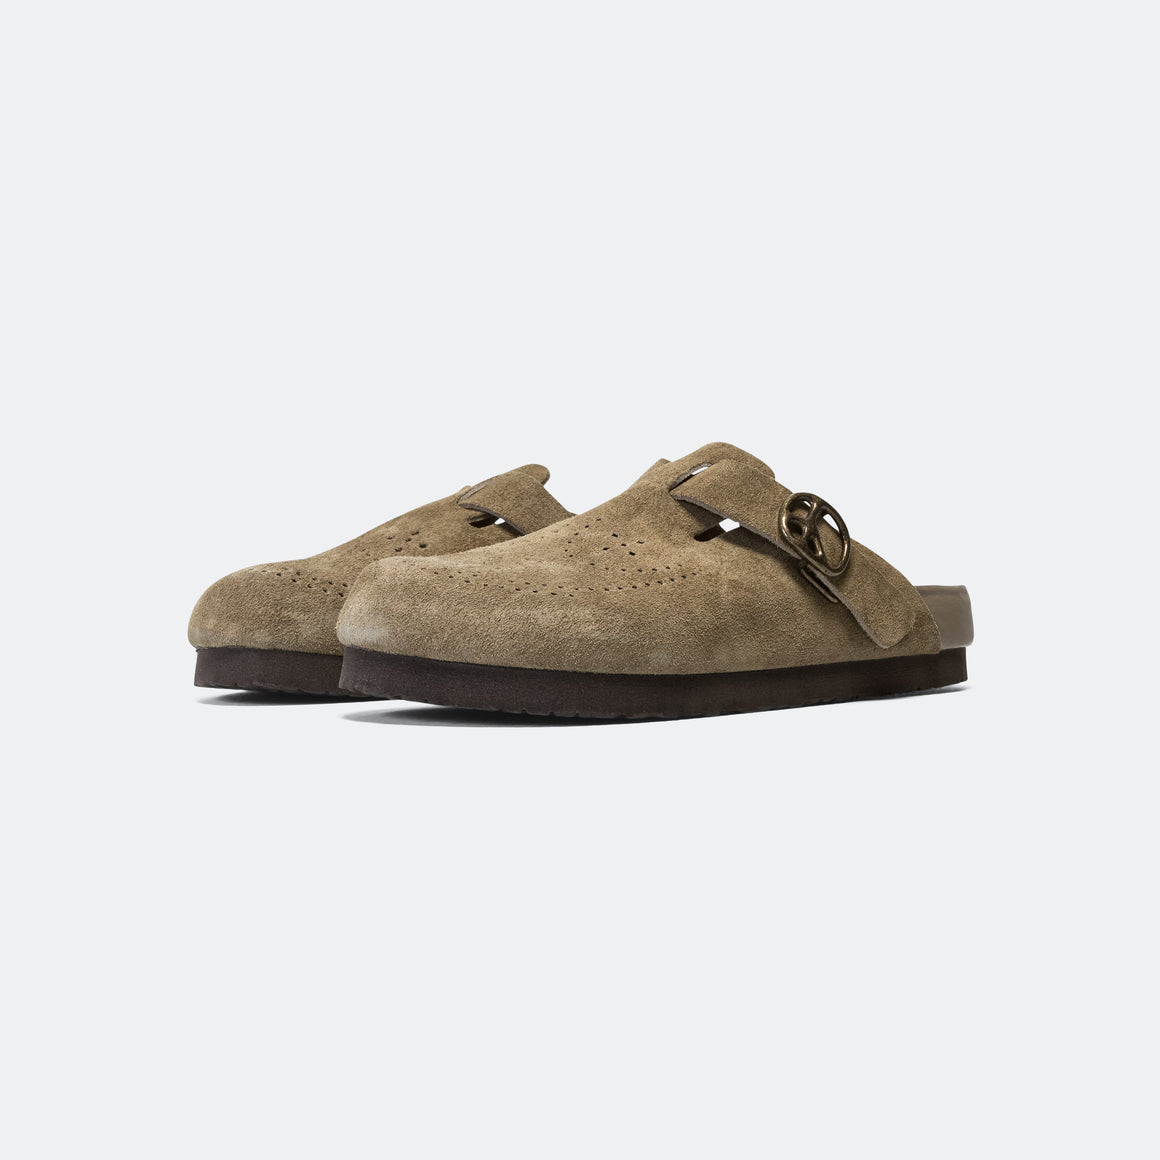 Clog Sandal - Taupe Suede Leather